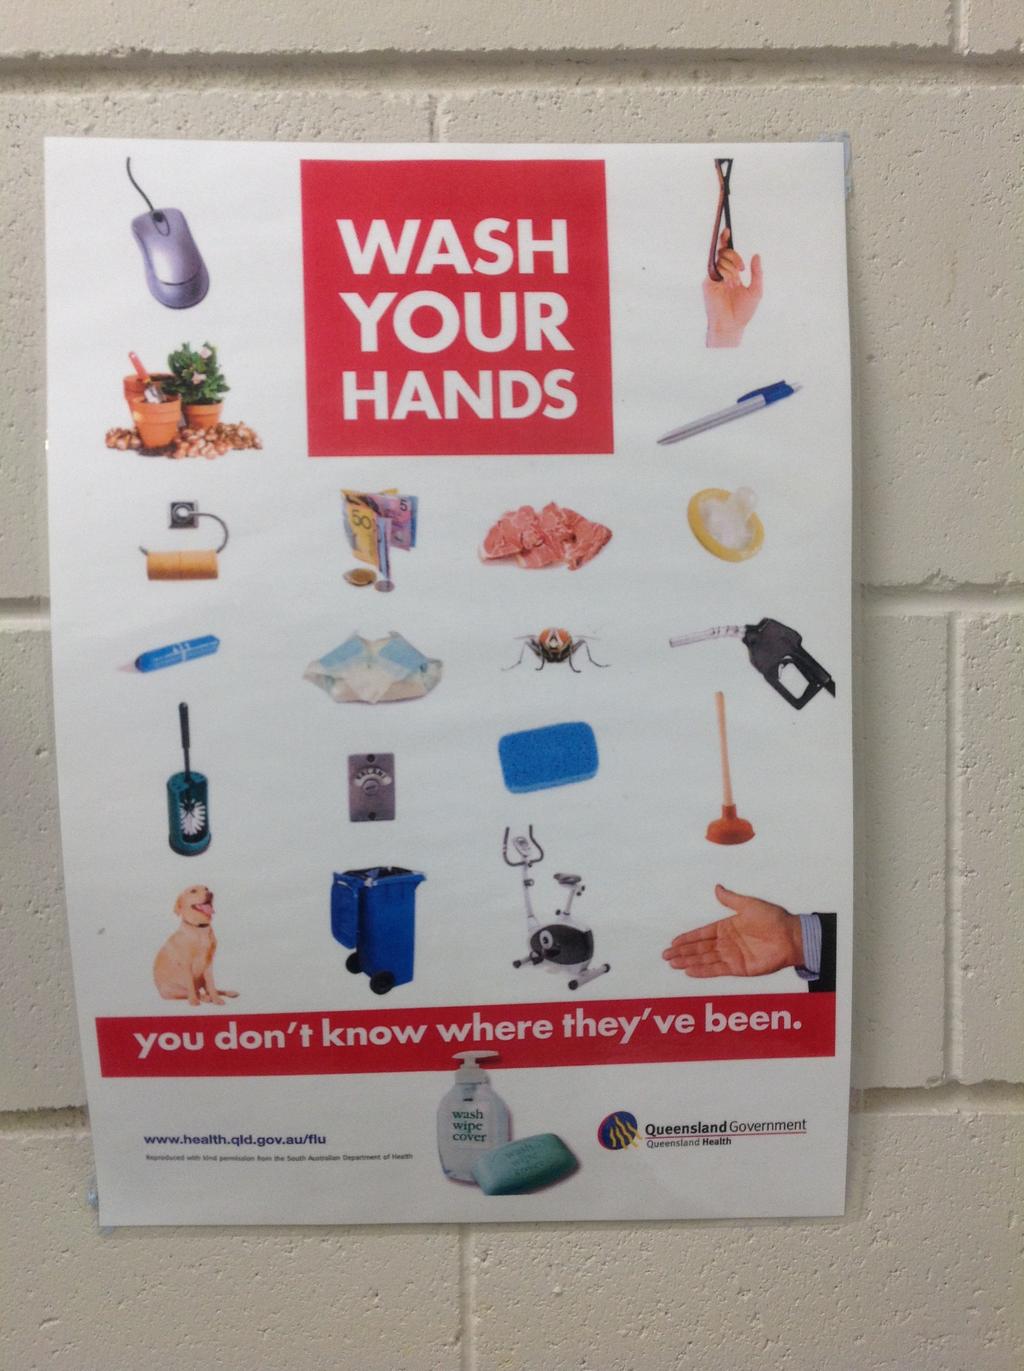 14 Cornerstone meets in a high school and these signs are everywhere. But, we care about hand washing for health reasons. For the Jews it was far more.